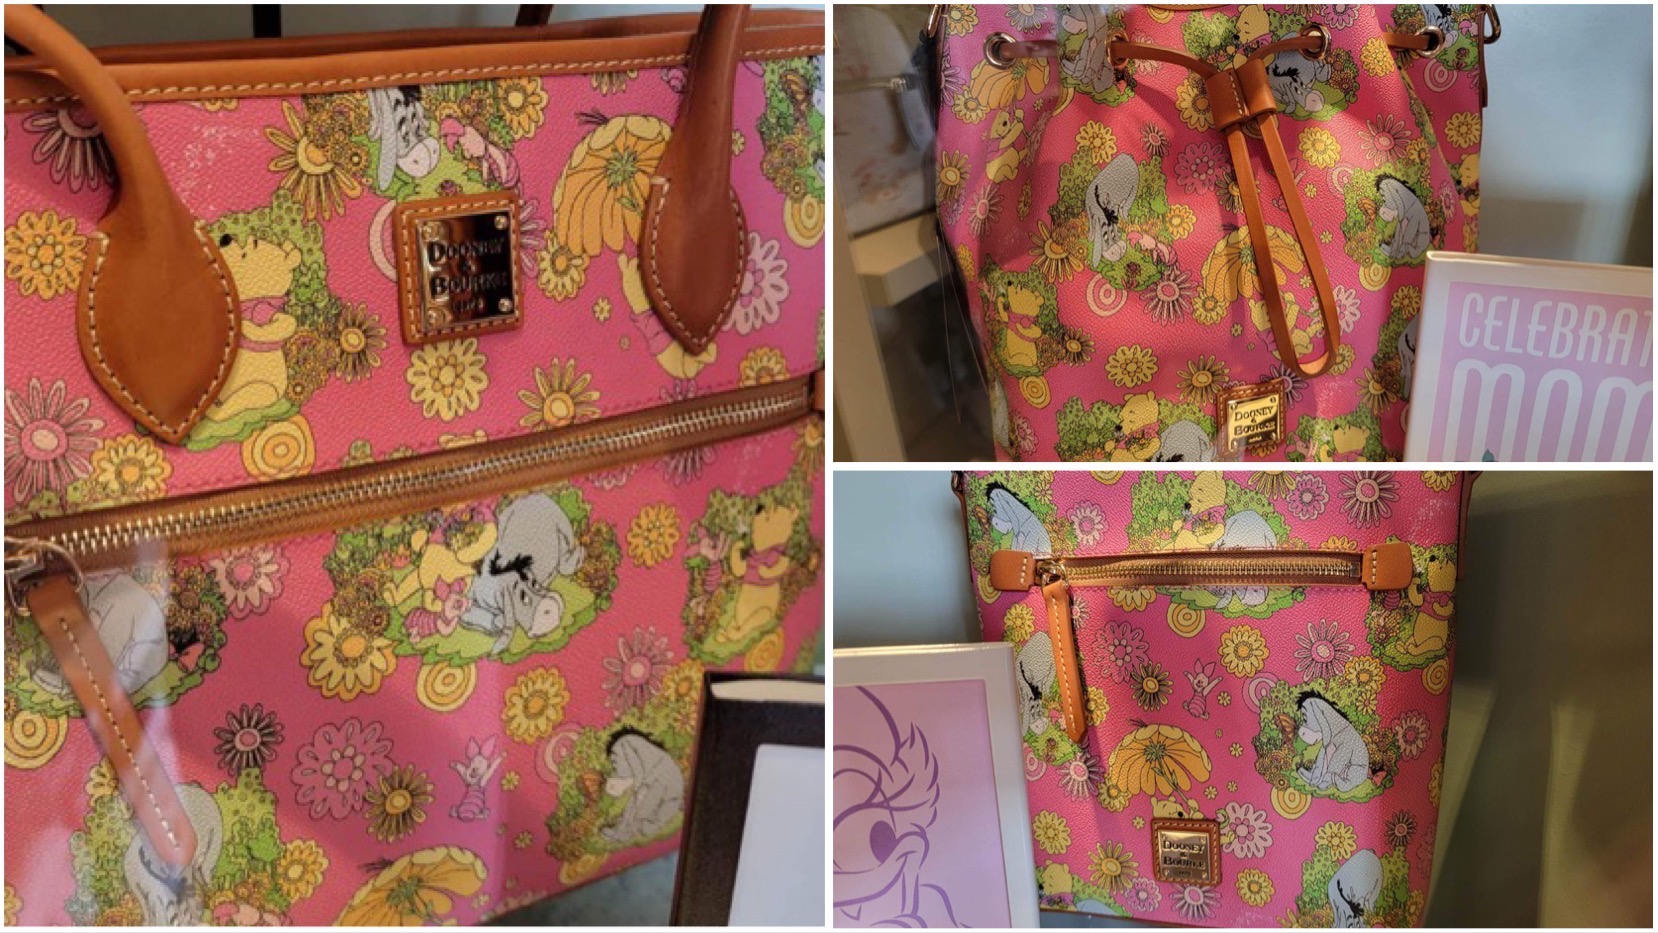 New Winnie The Pooh Dooney And Bourke Collection Is In Full Bloom At Walt Disney World!